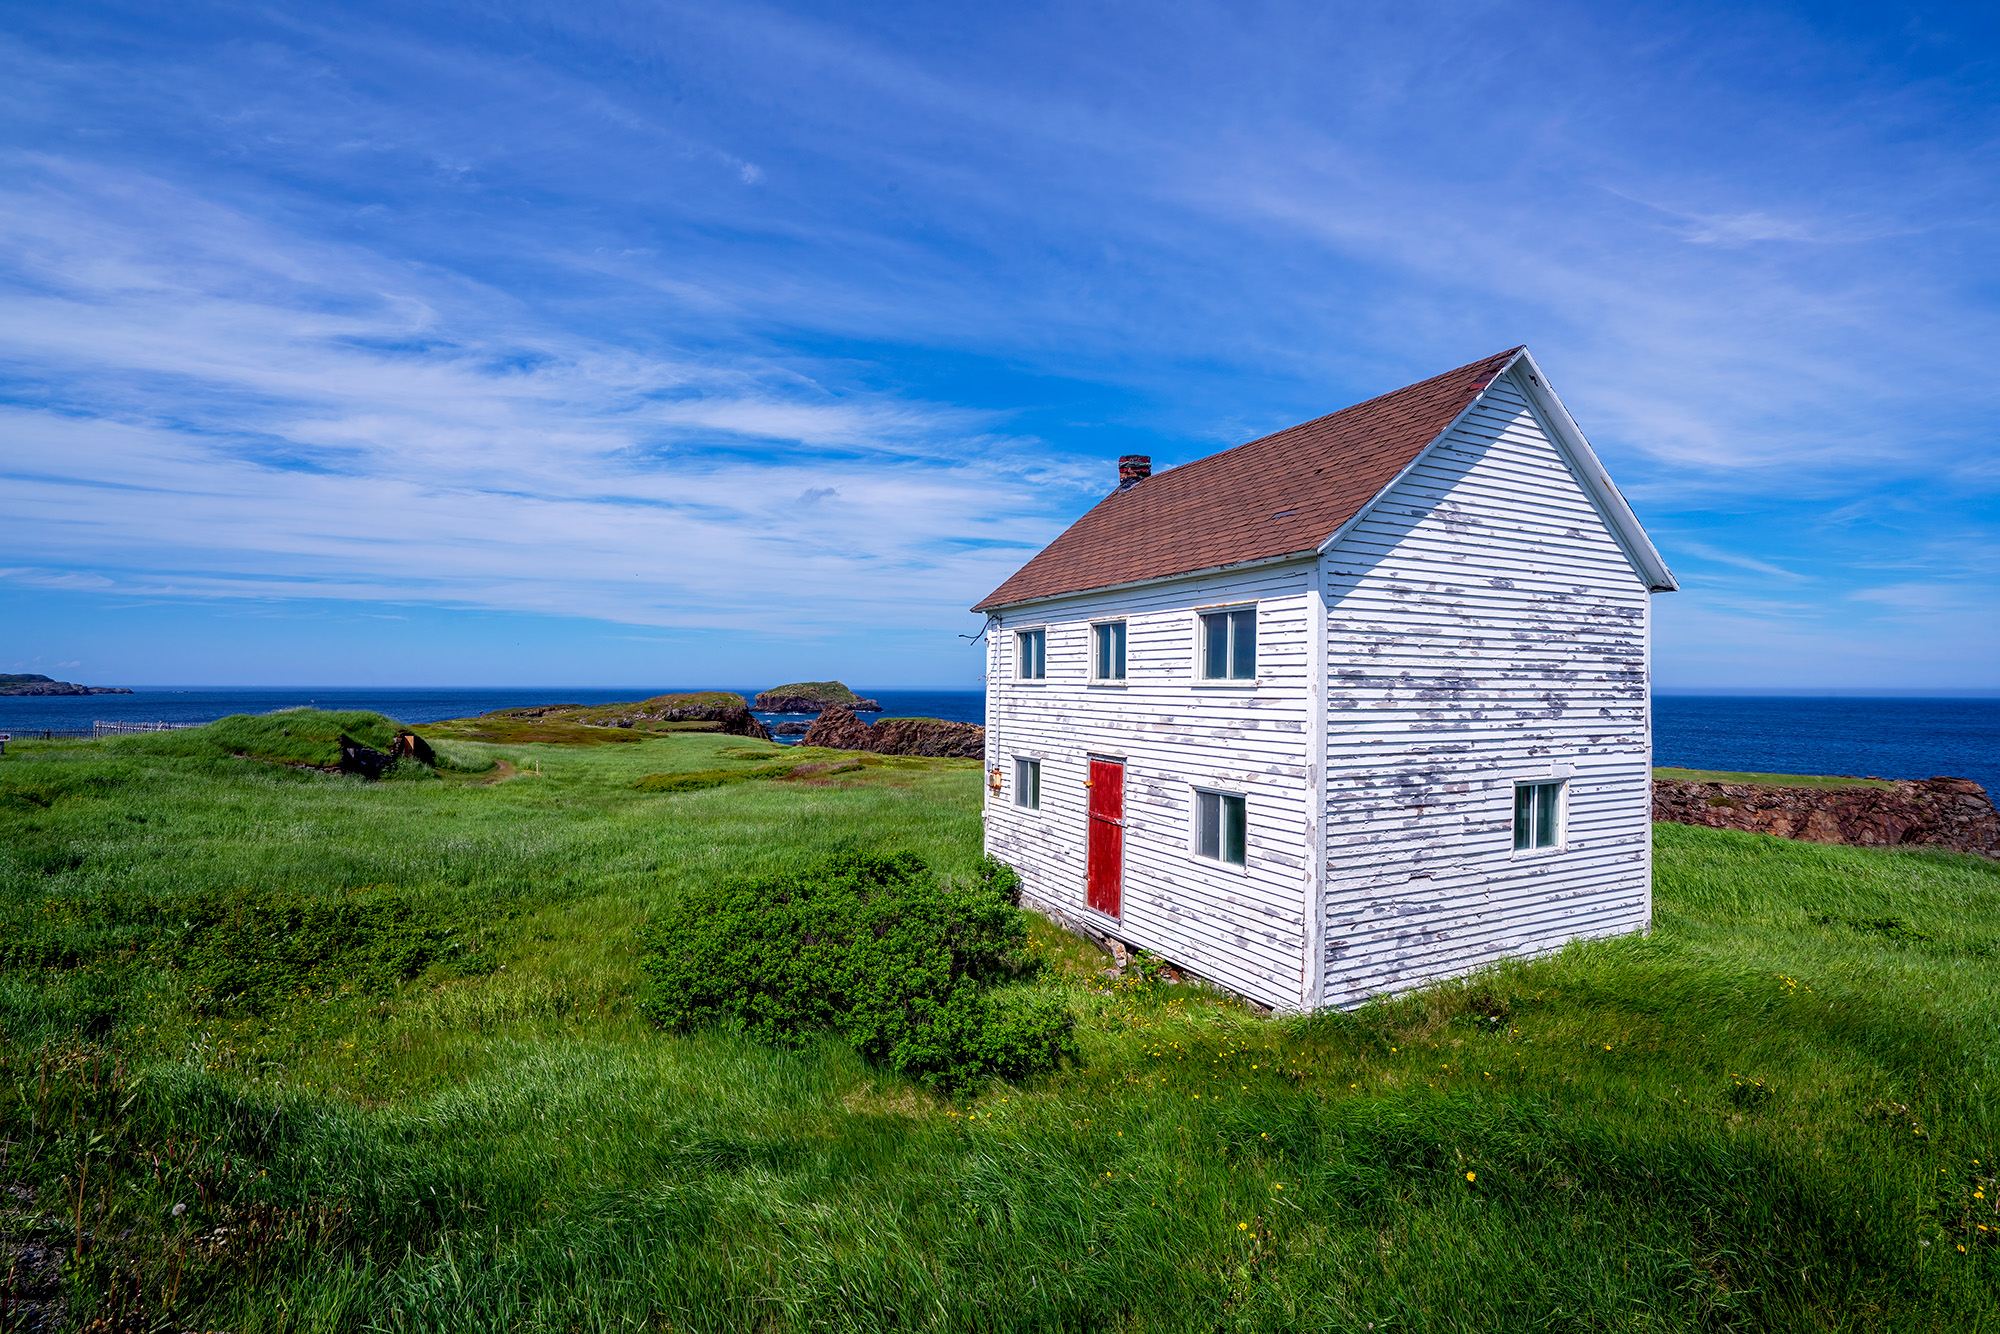 In the picturesque coastal town of Elliston, Newfoundland, simplicity takes center stage in this composition. Three fundamental...